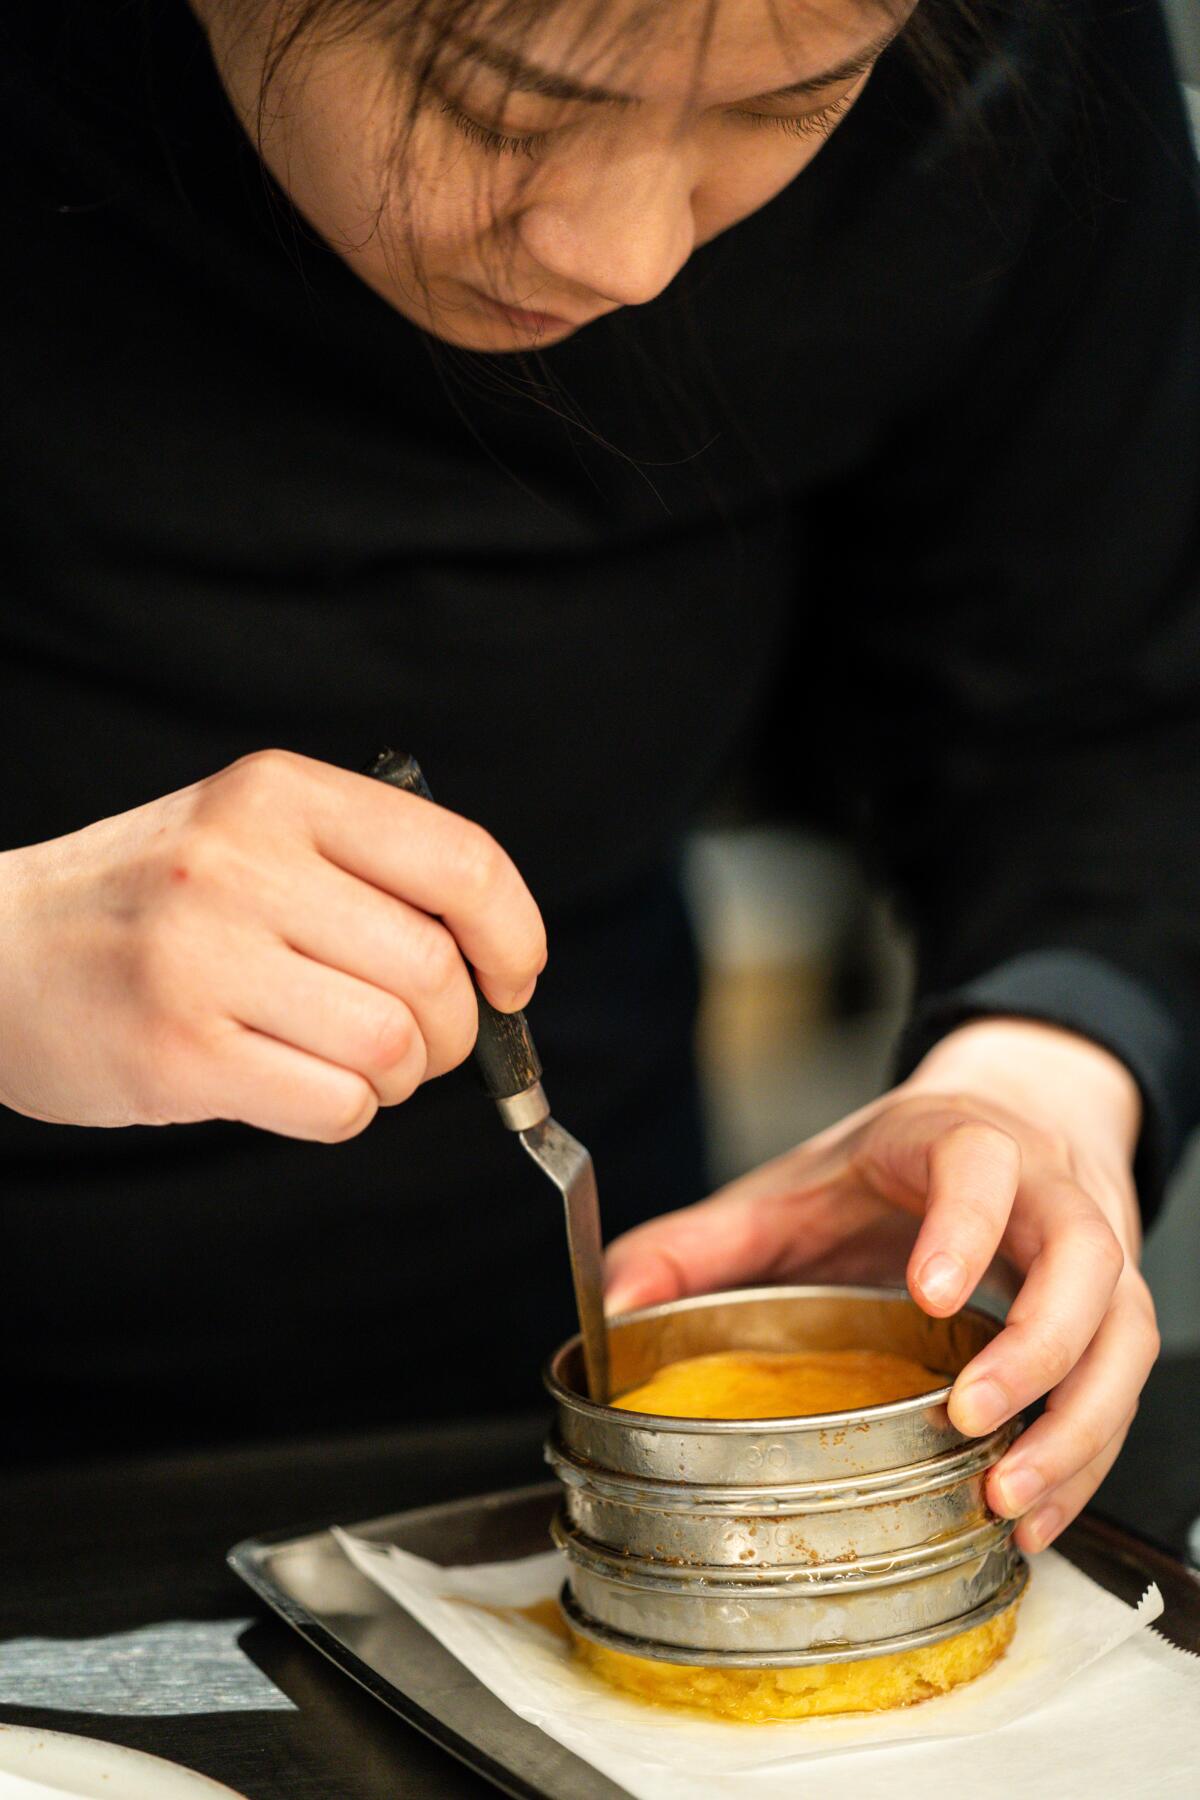 Dyan Ng runs a tool along the inside of the mold to release the cooked brioche. 